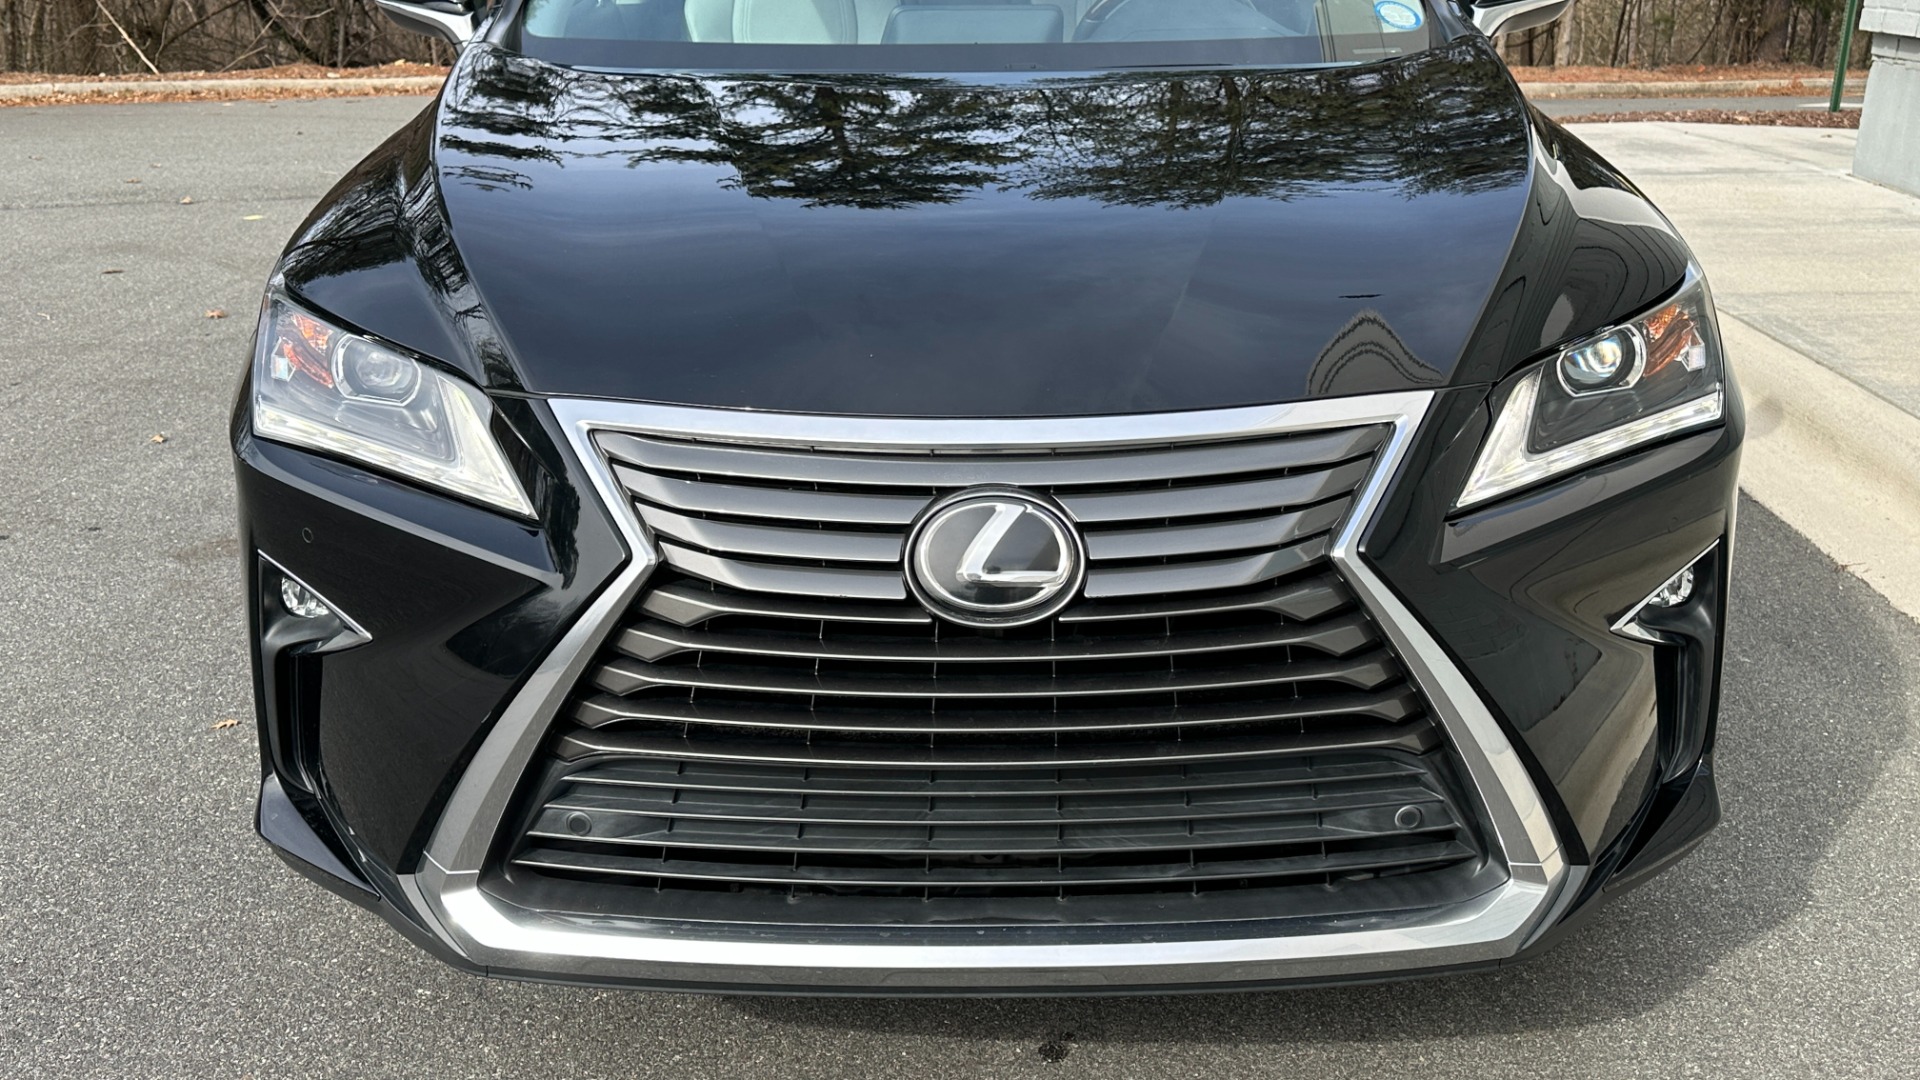 Used 2018 Lexus RX 350 3.5L V6 / PREMIUM / BLIND SPOT MONITOR / VENT STS / REARVIEW for sale $36,200 at Formula Imports in Charlotte NC 28227 44